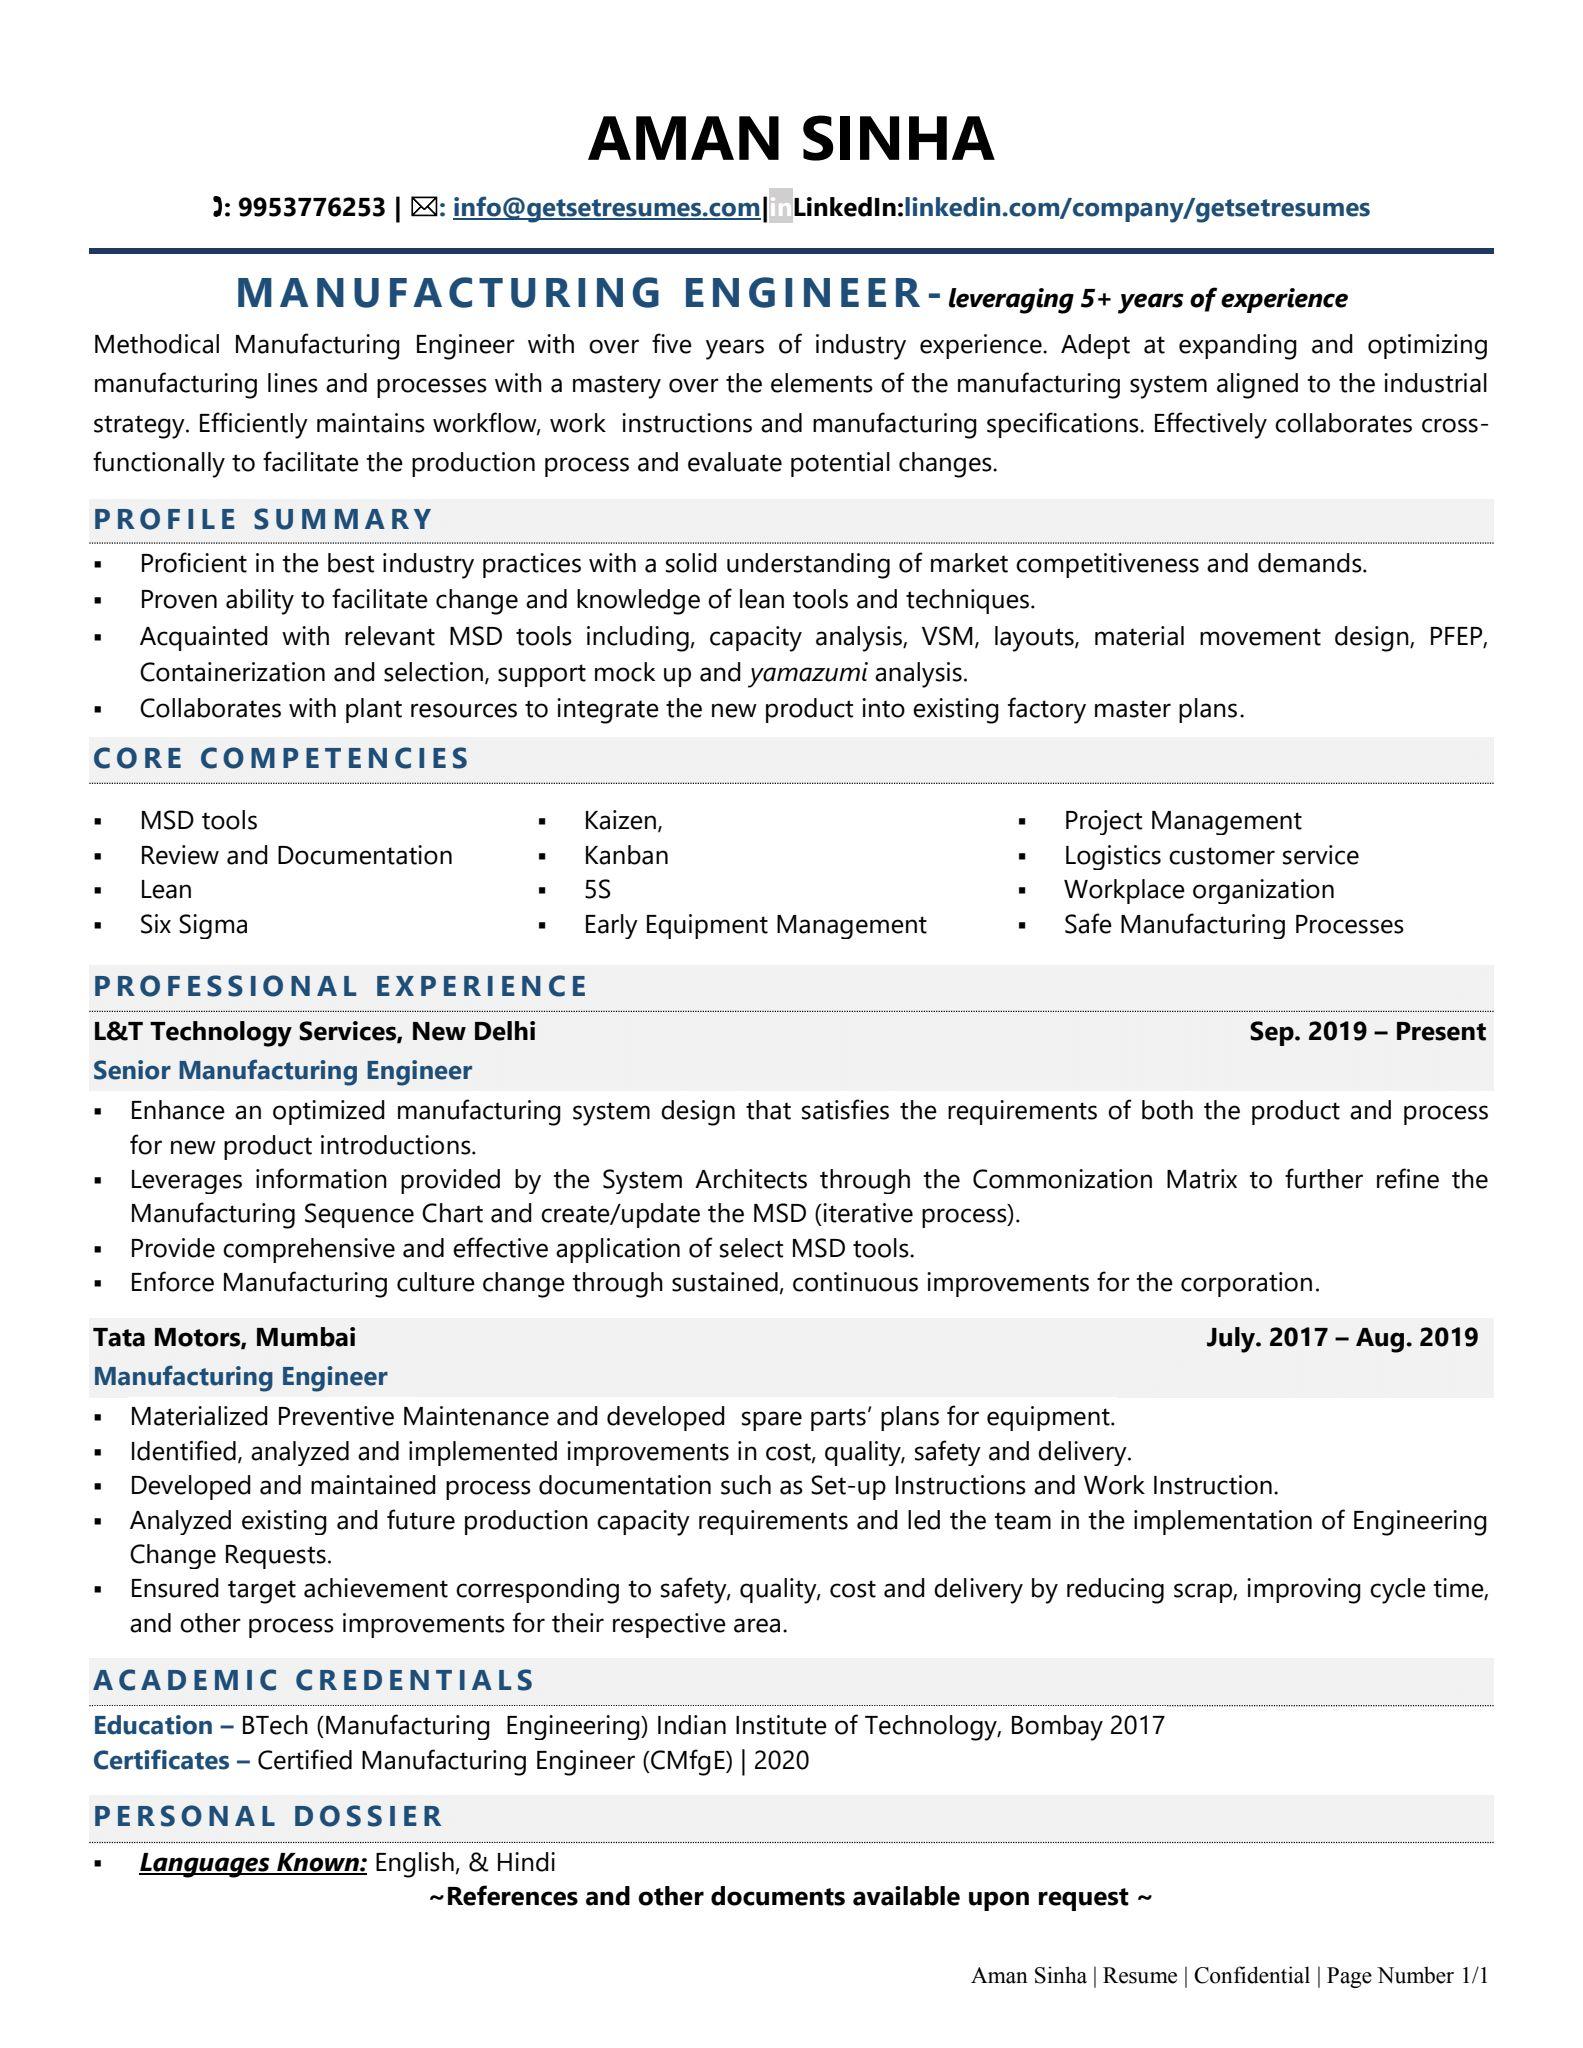 Manufacturing Engineer - Resume Example & Template